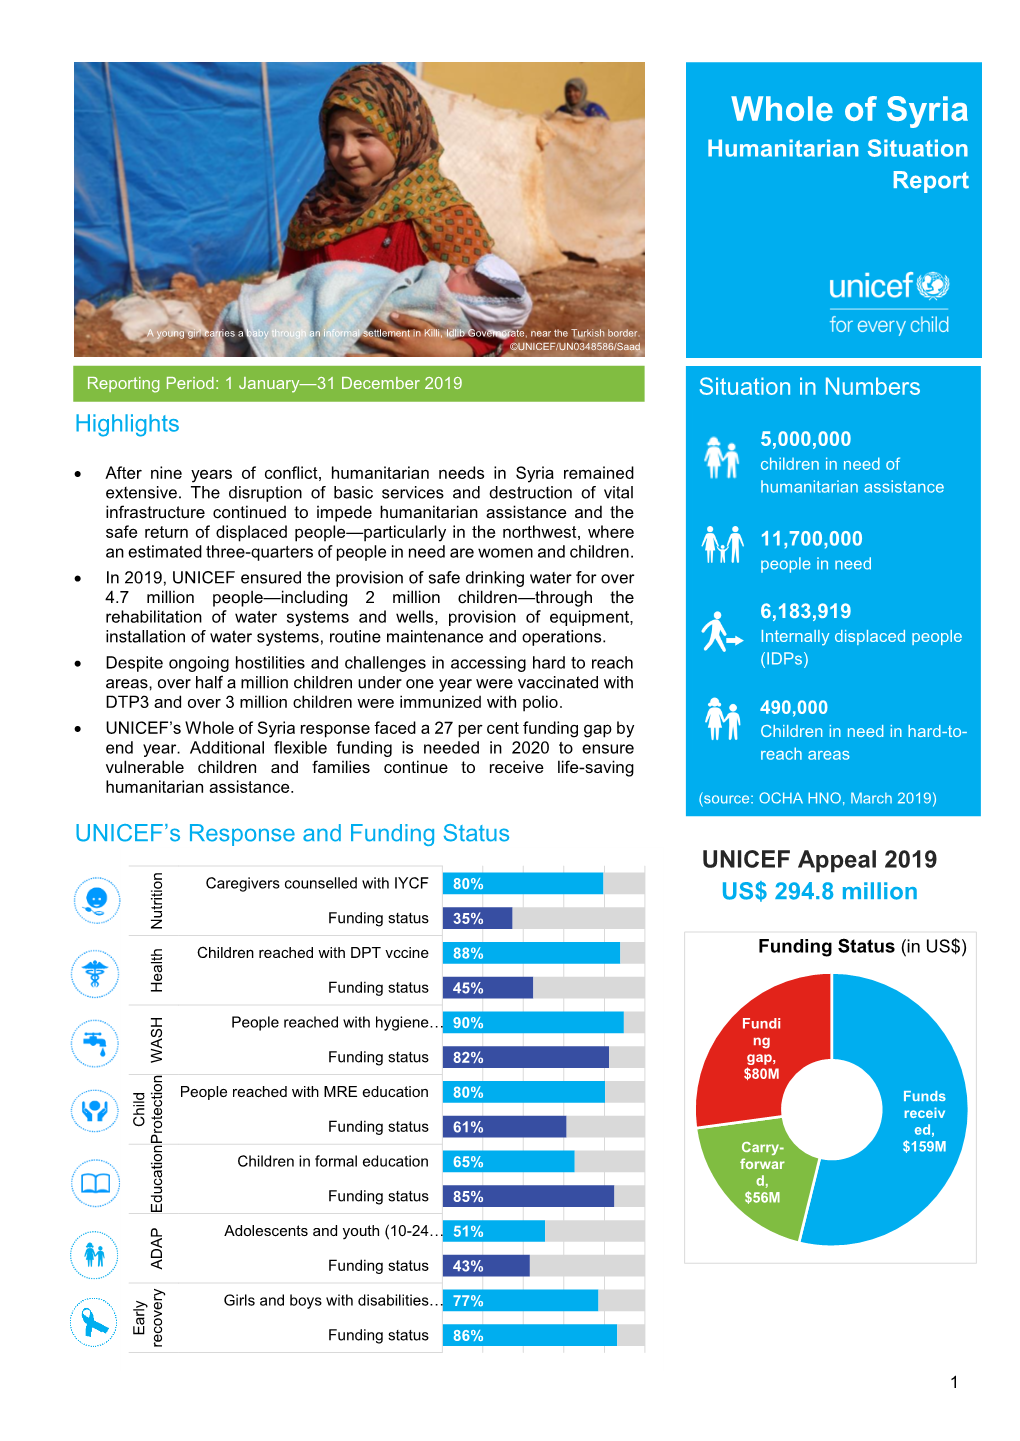 Whole of Syria Humanitarian Situation